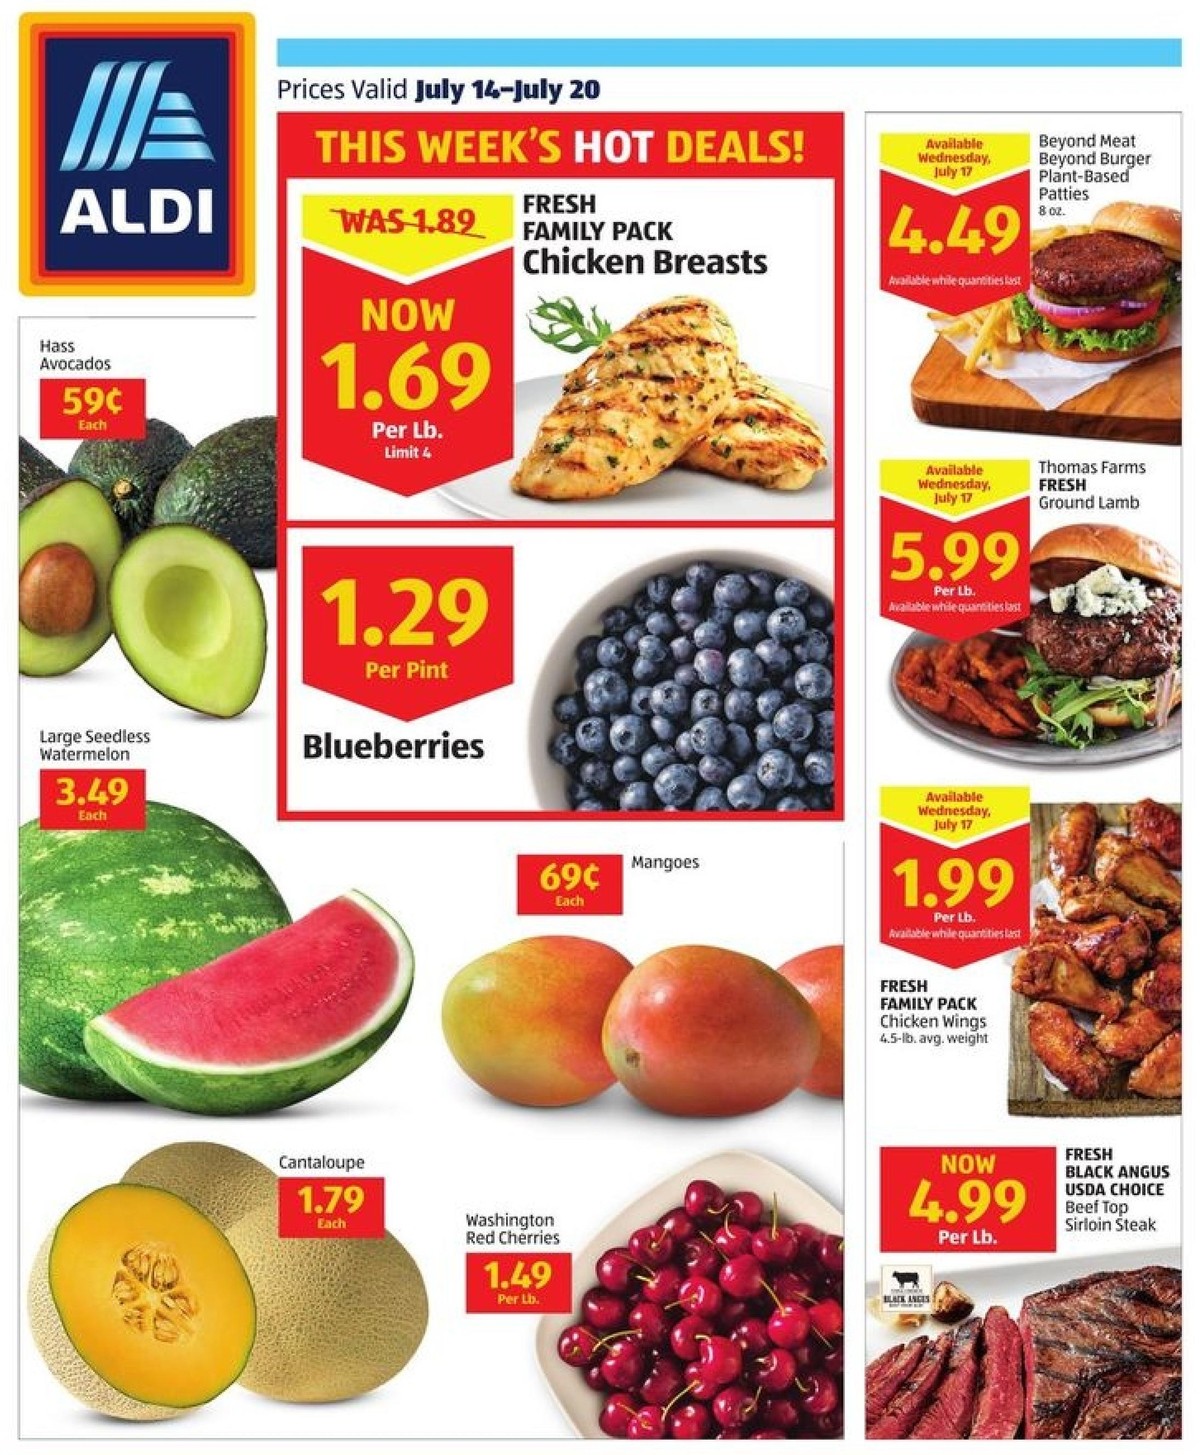 ALDI Weekly Ad from July 14